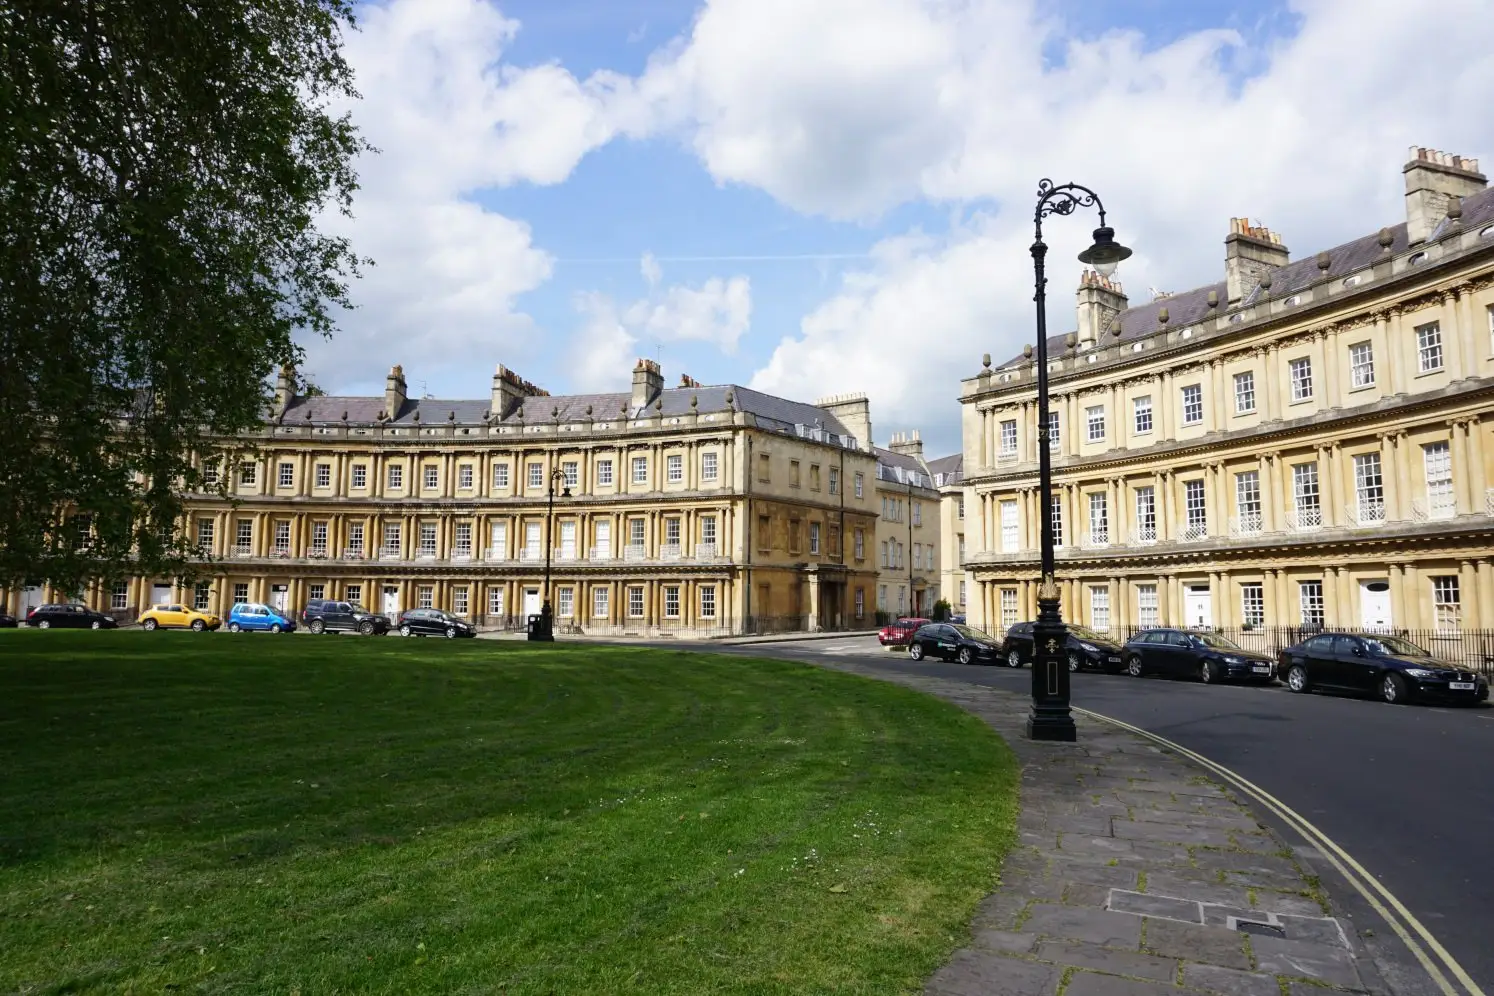 The Circus, iconic round-shaped building in Bath